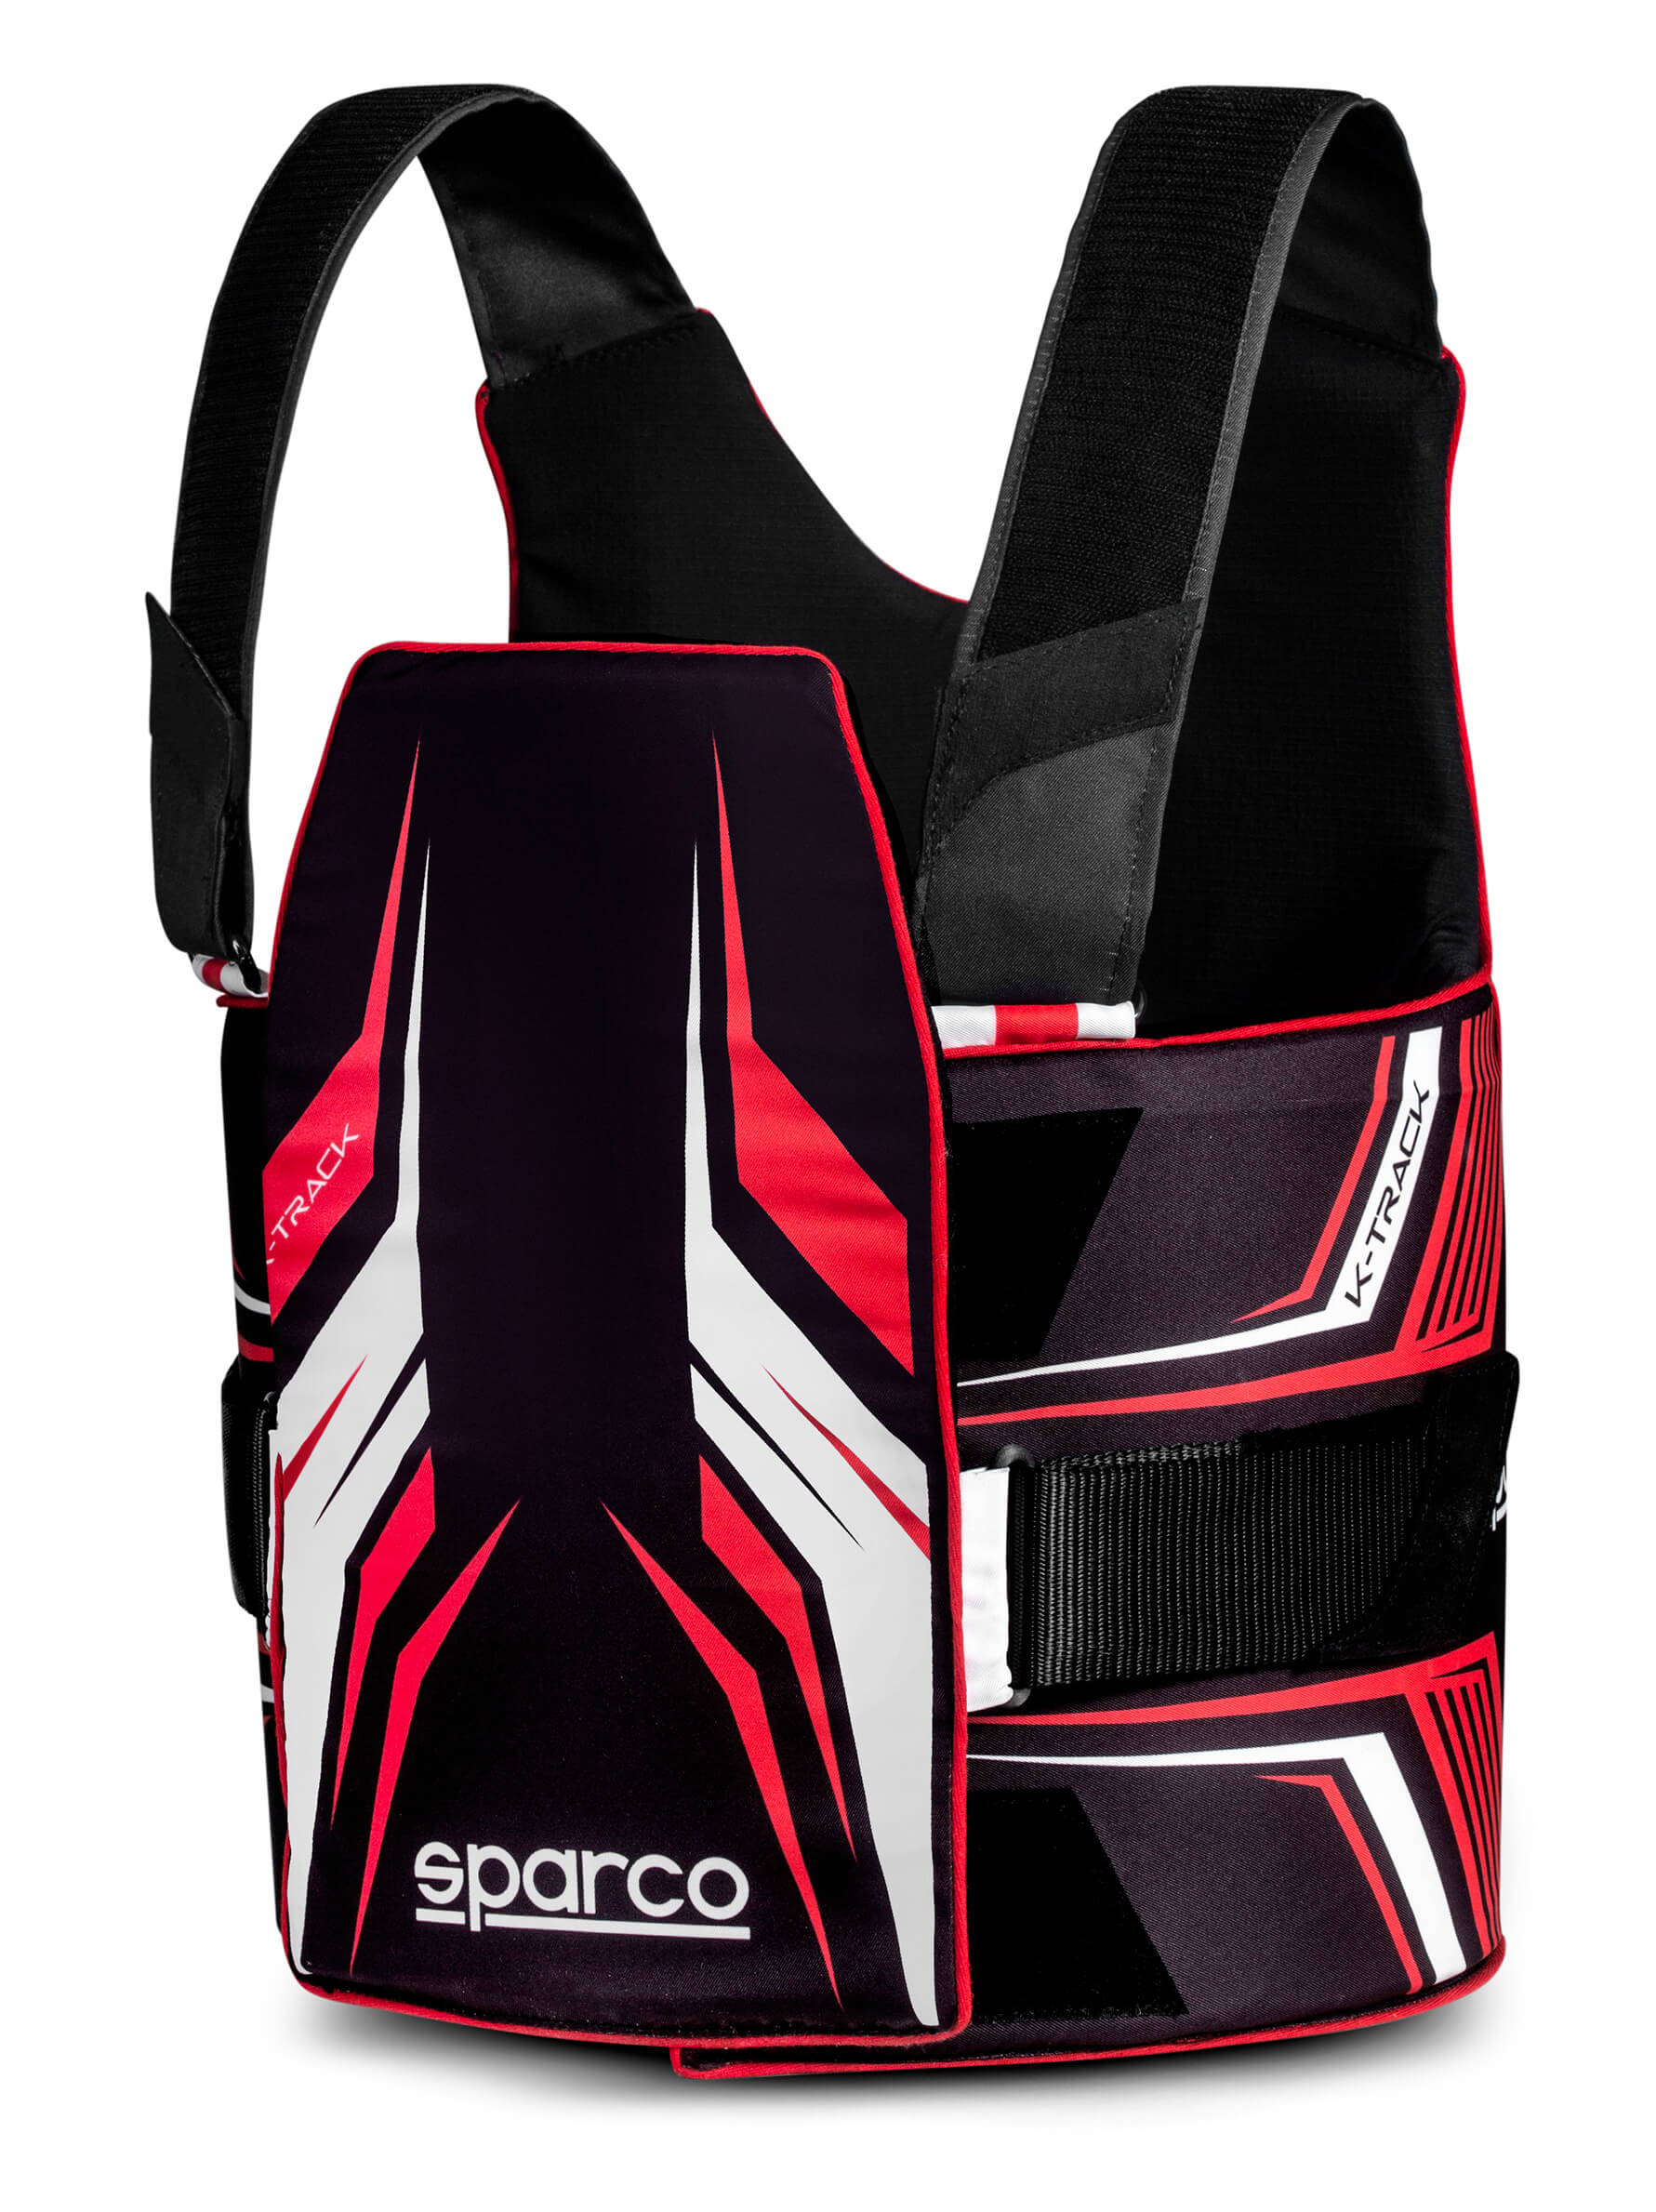 SPARCO 002406KNRRS1213 K-TRACK Karting Rib Protector, FIA 8870-2018, child, black/red, size 120-130 Photo-0 